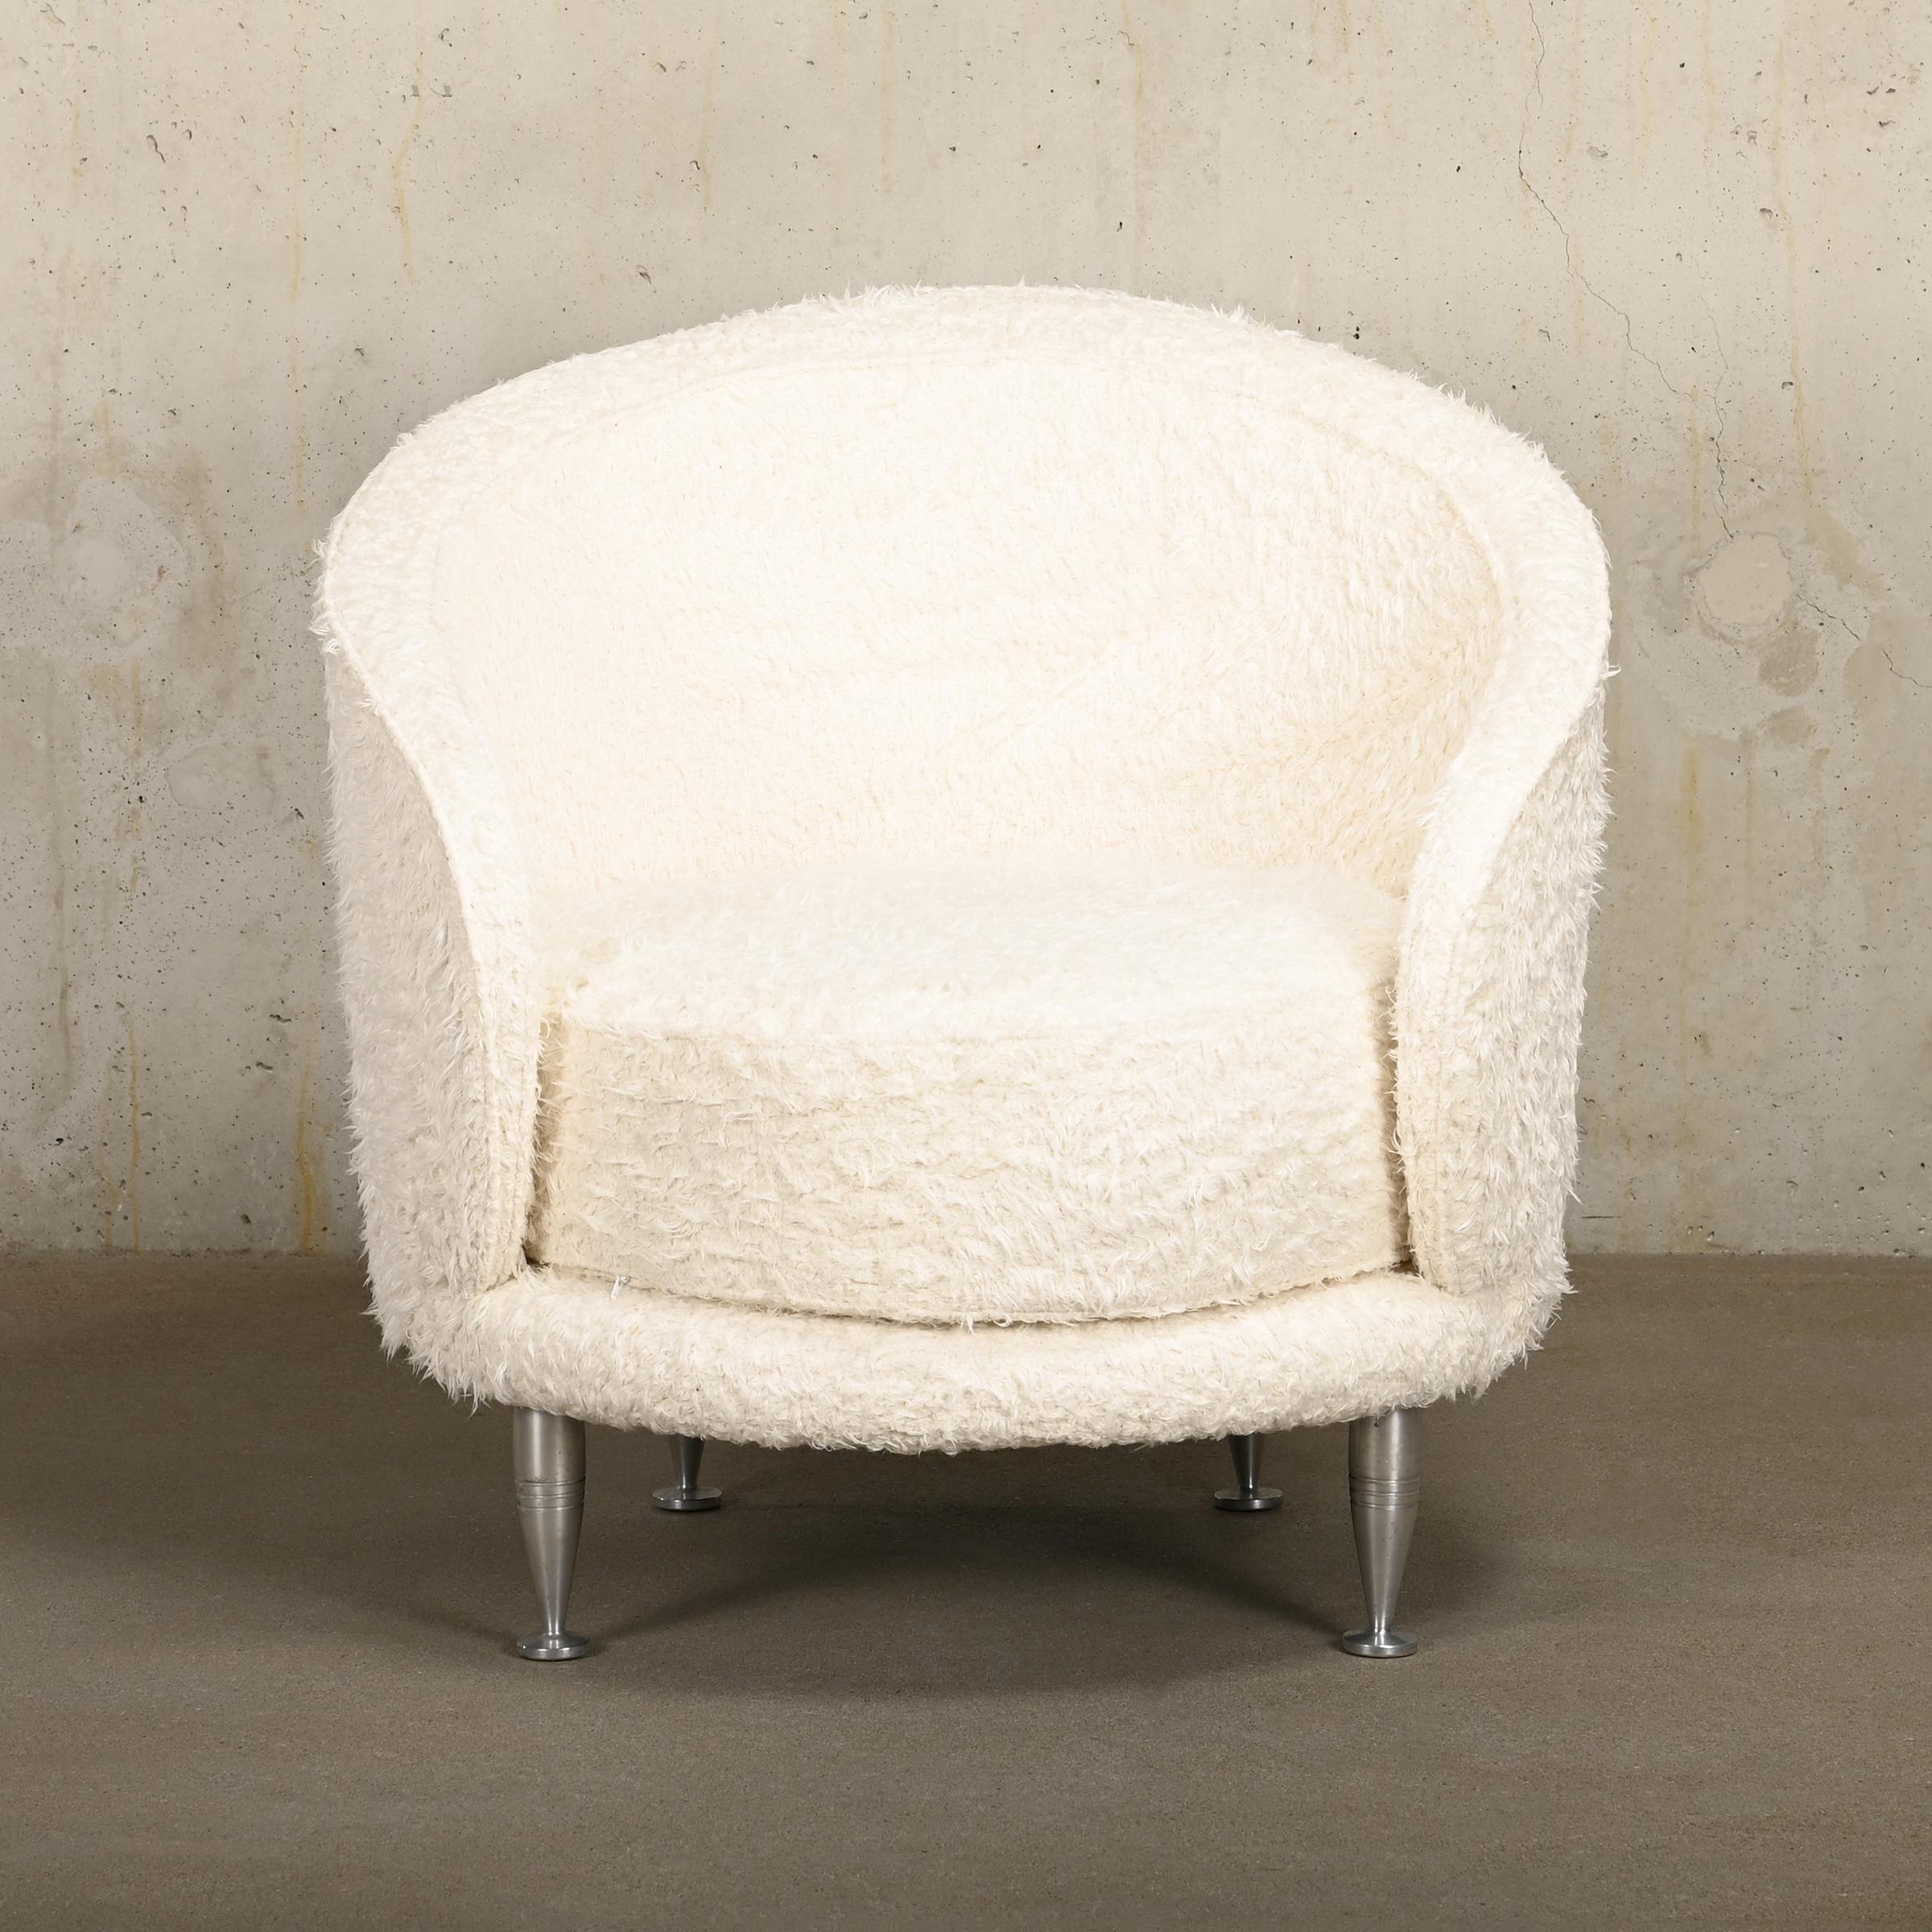 Contemporary Massimo Iosa Ghini Armchair New Tone in white long pile cotton for Moroso, Italy For Sale